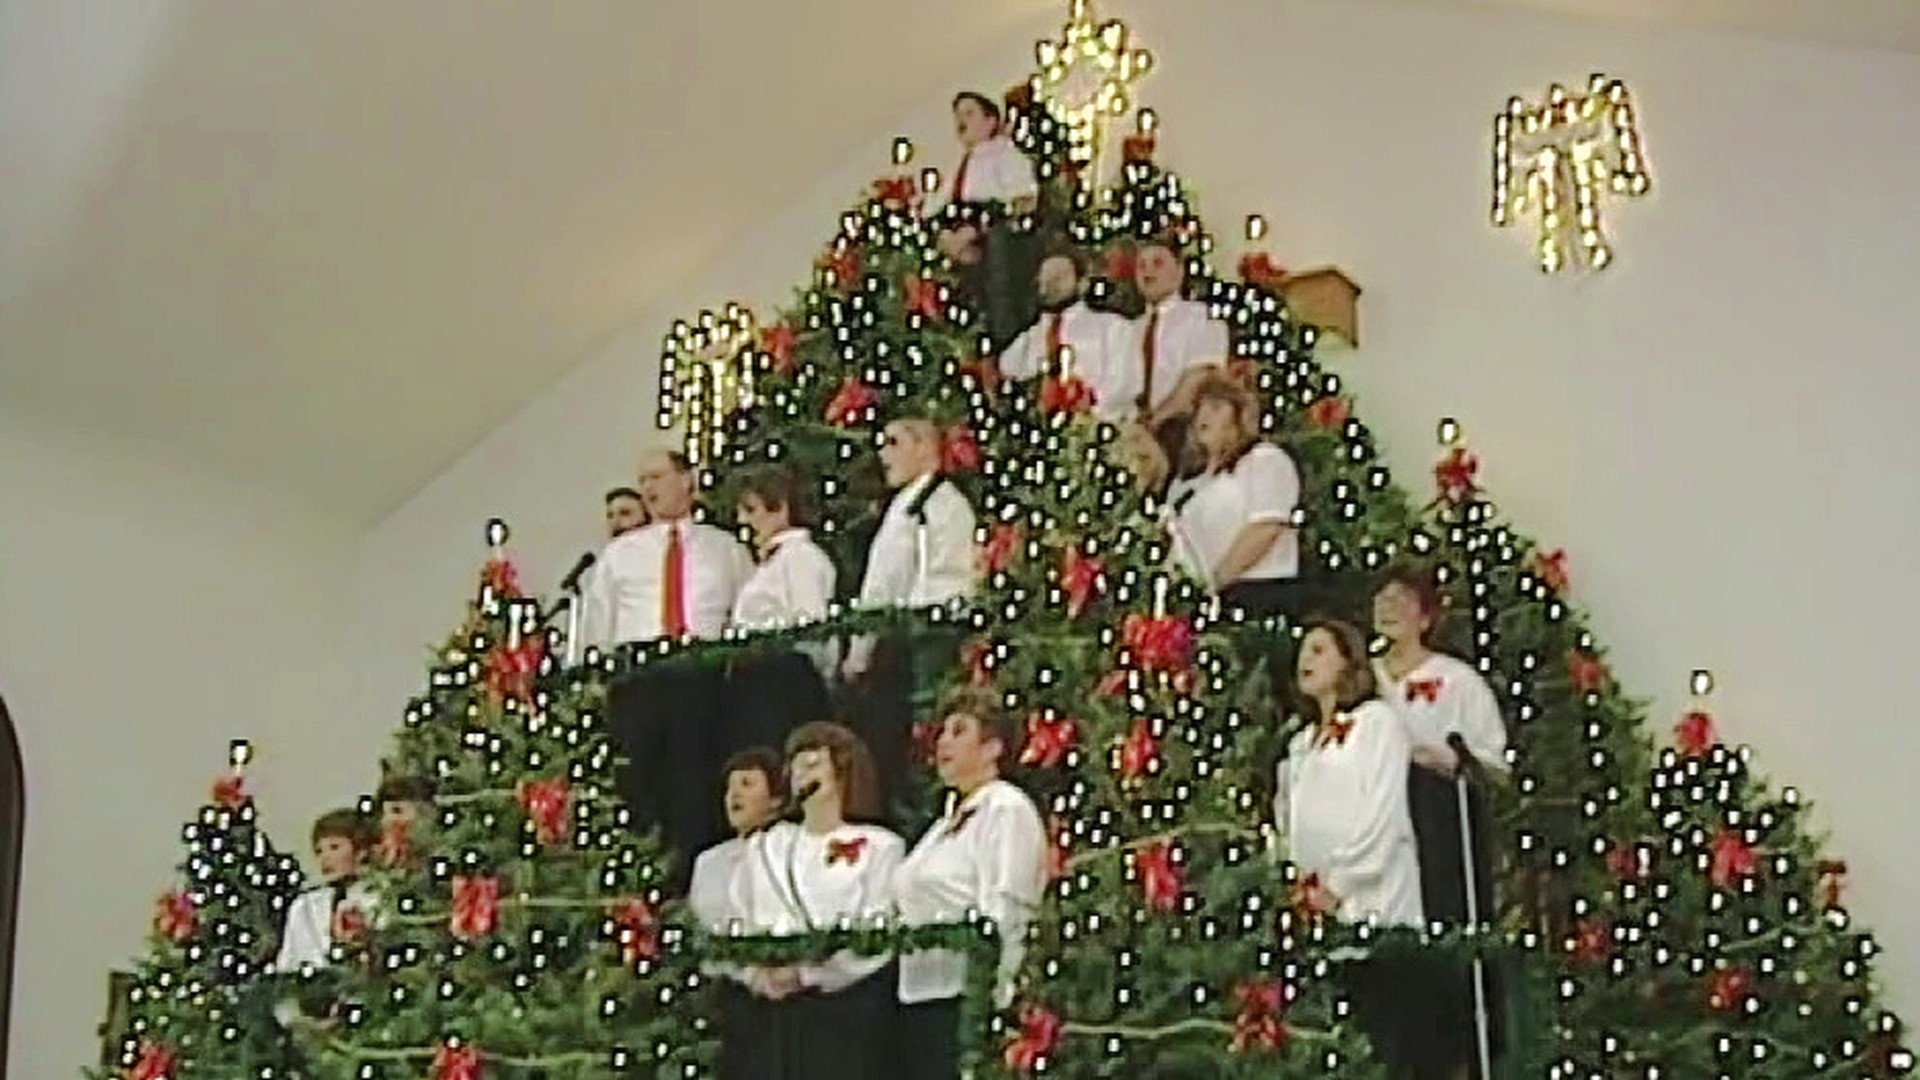 Mike Stevens shares a Christmas visit to a church in Columbia County 25 years ago.